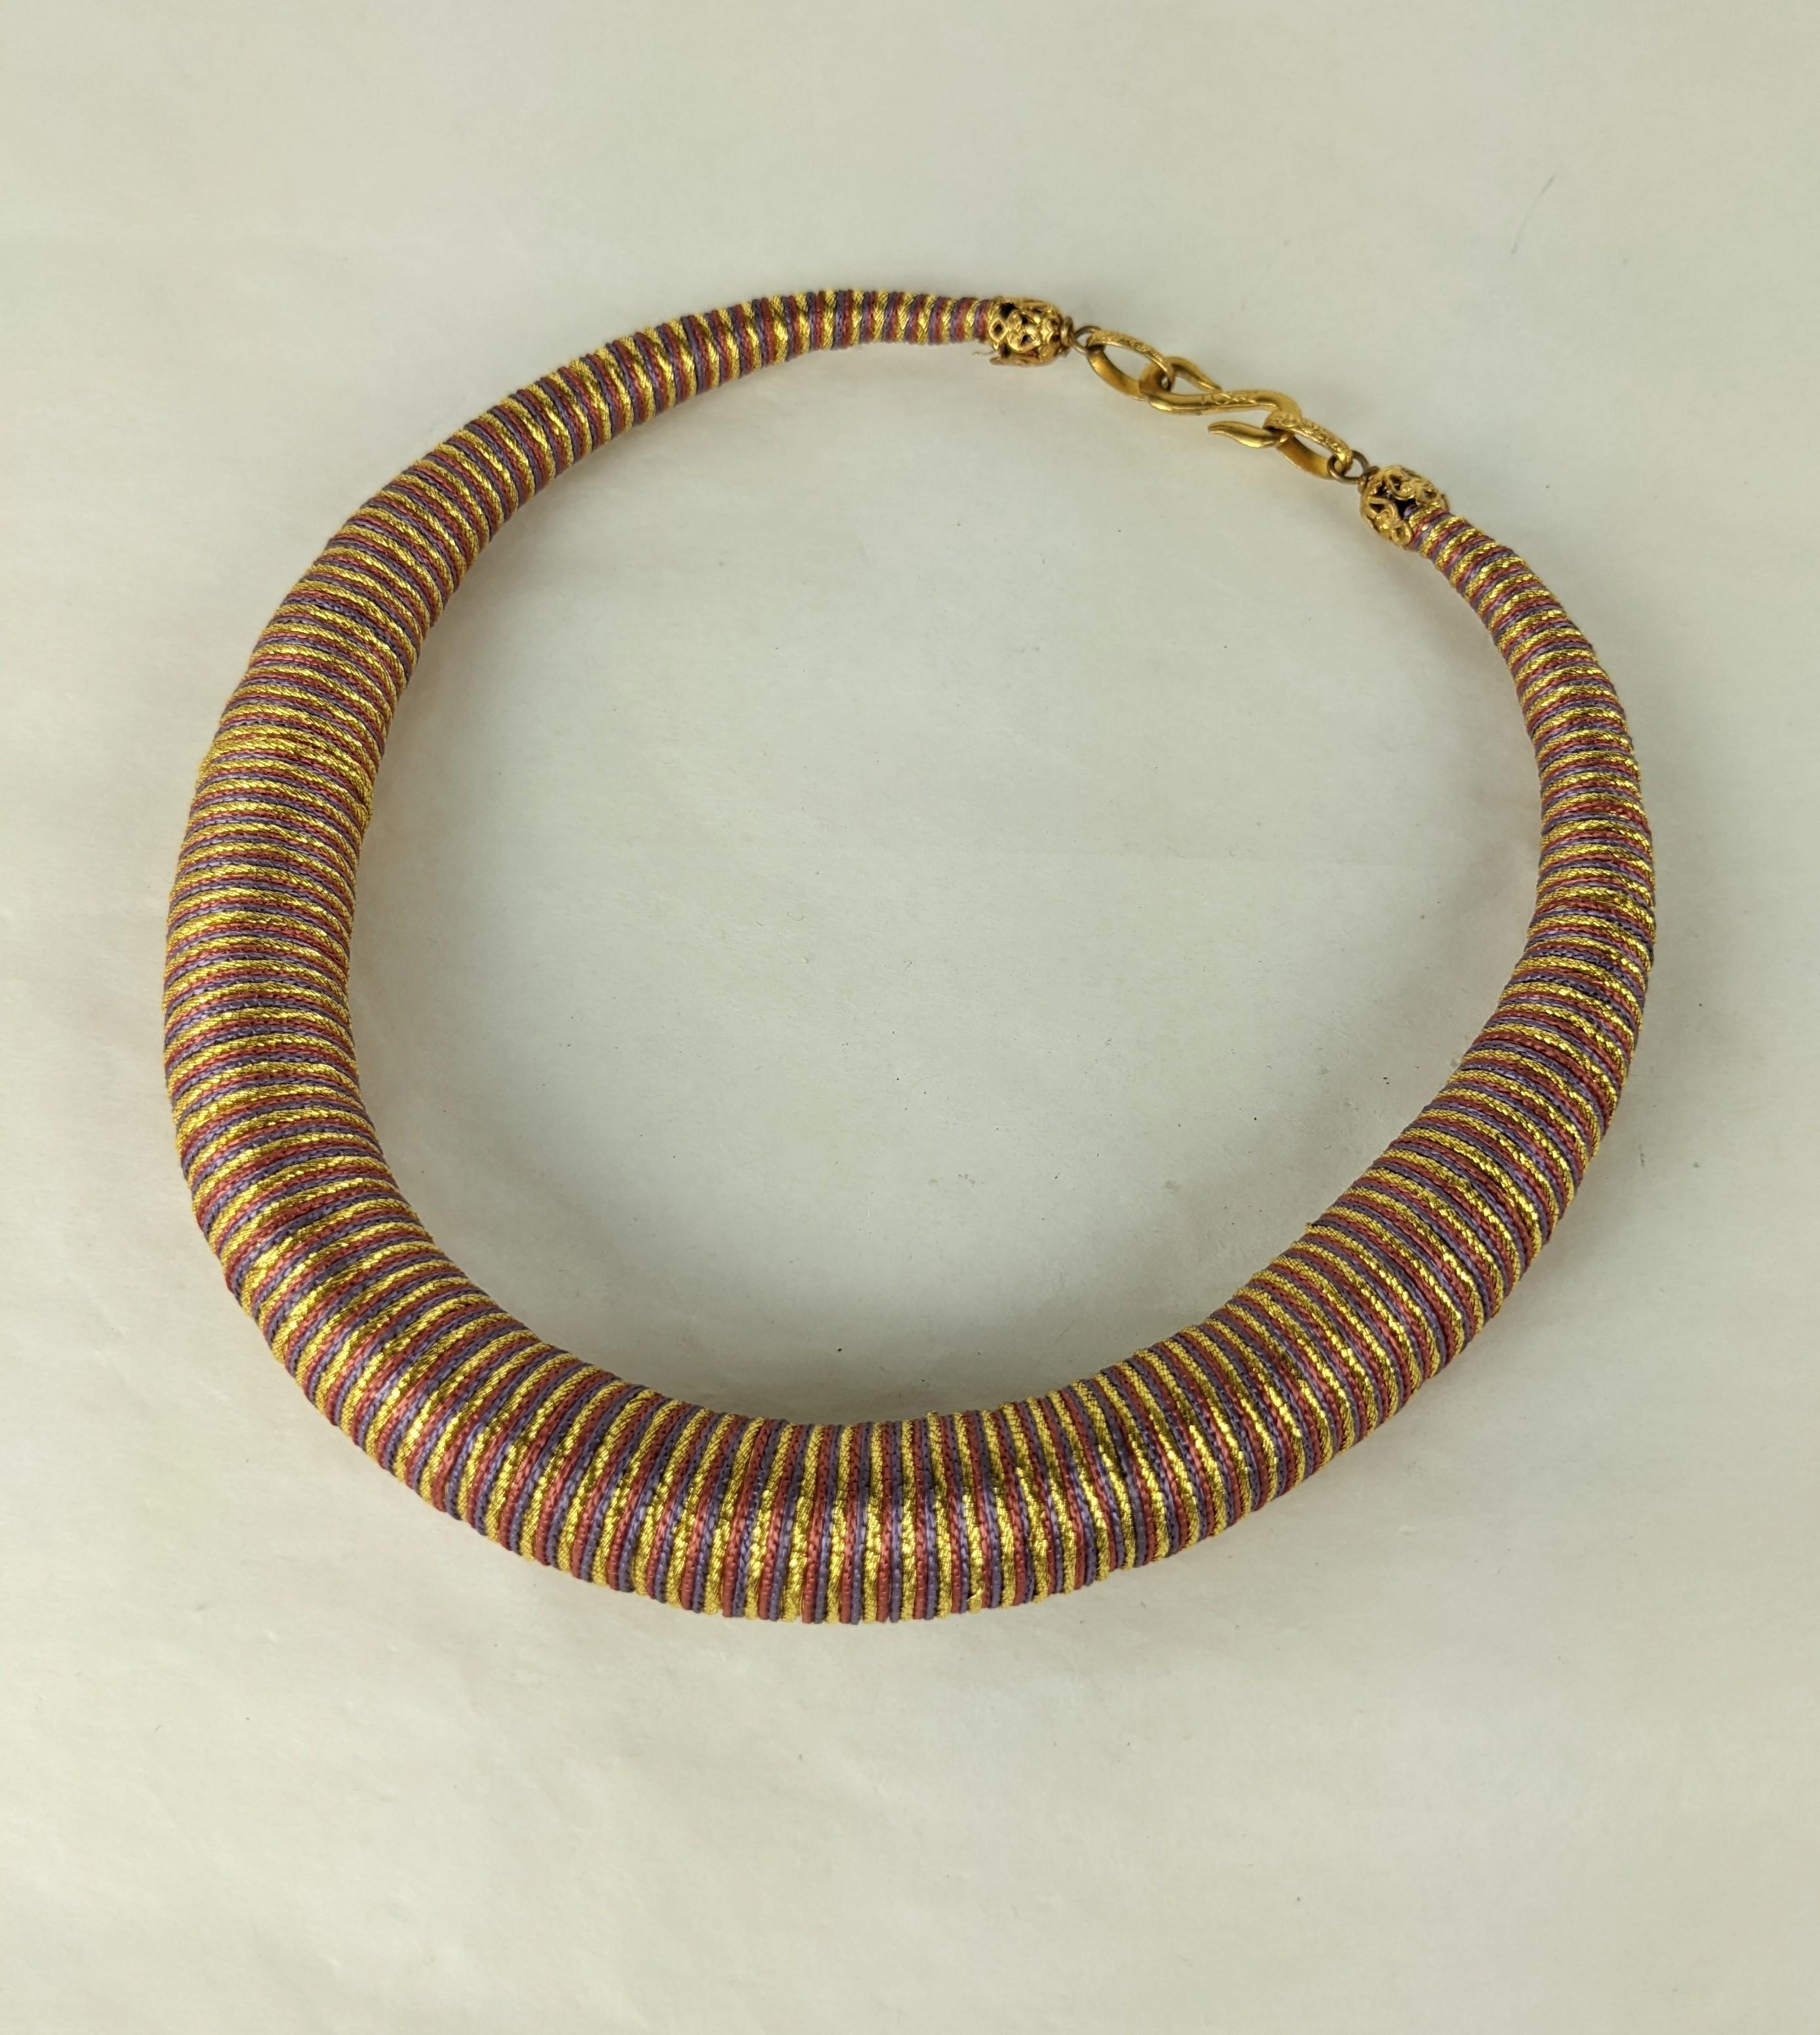 Rare Yves Saint Laurent  Russian Collection torque necklace from Fall-Winter 1976 Haute Couture collection. Deceptively constructed with a soft core tightly wrapped gold metallic, deep rasberry and lavender silk soutache passementerie cord,